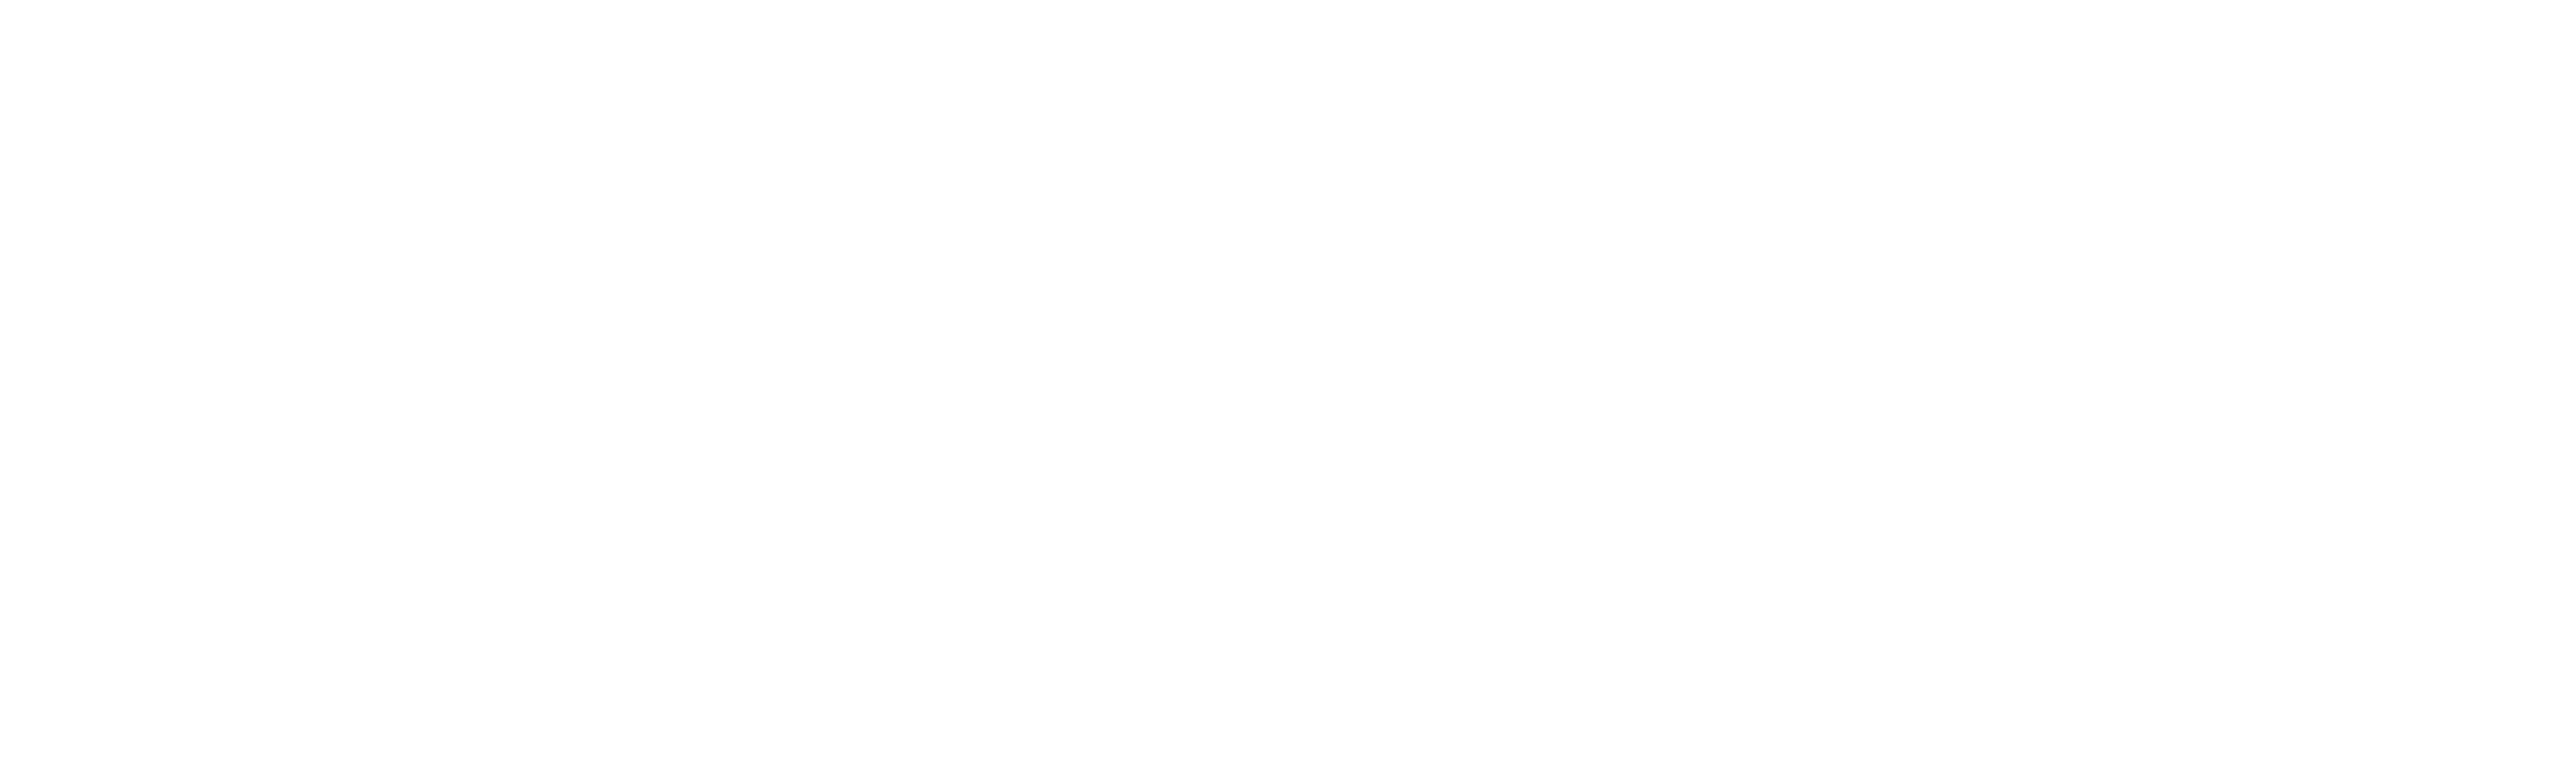 Watch The Last of Us (HBO)